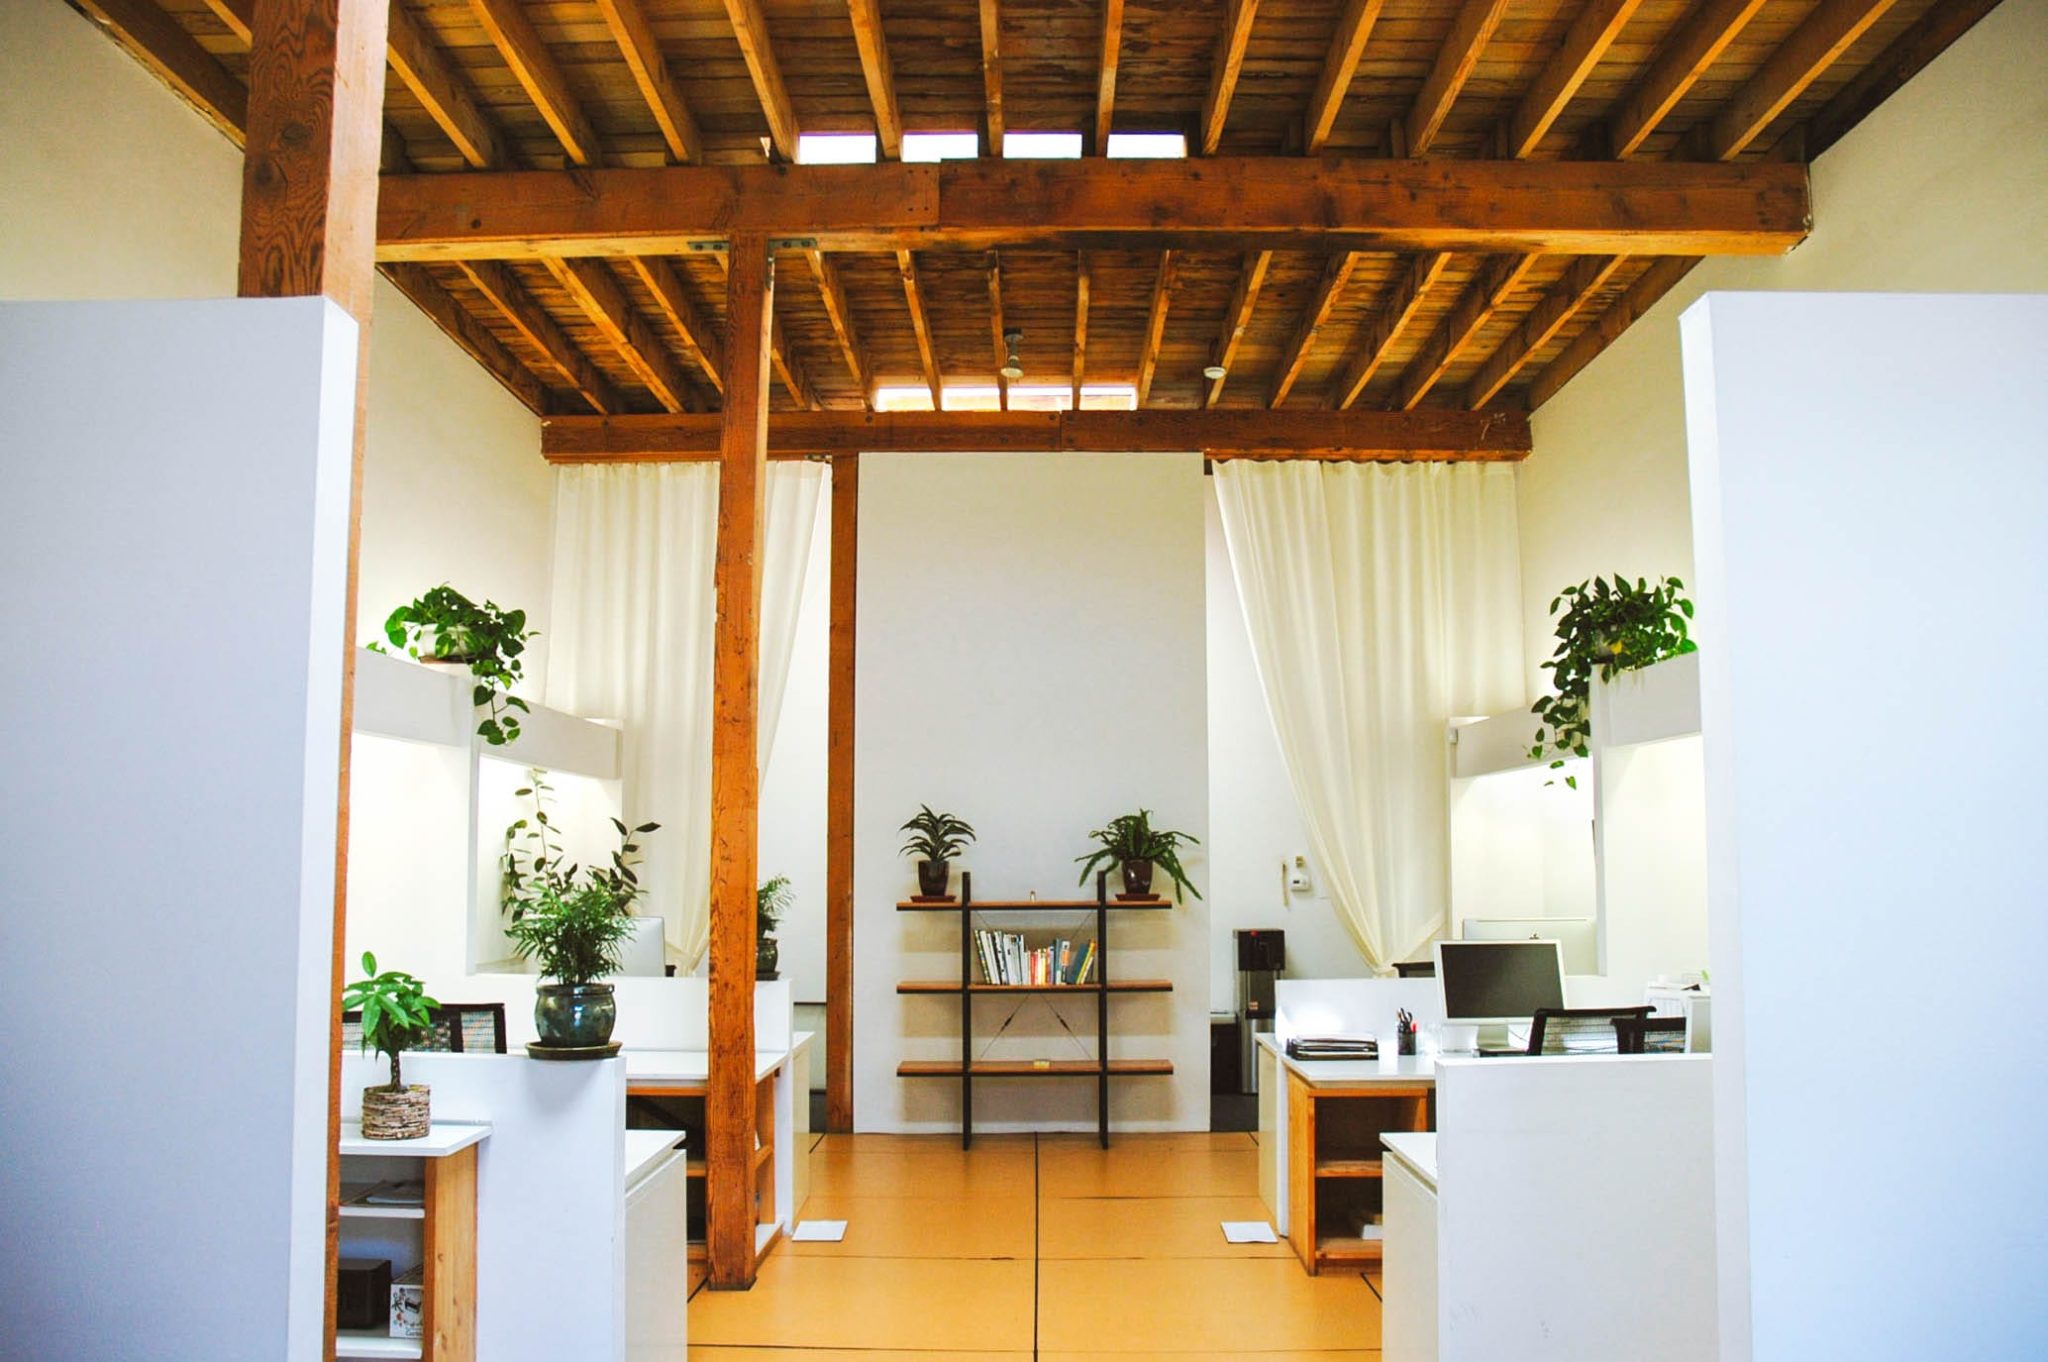 Image of inside a studio space. There are wooden beams on the veiling, and white desks lining the walls.